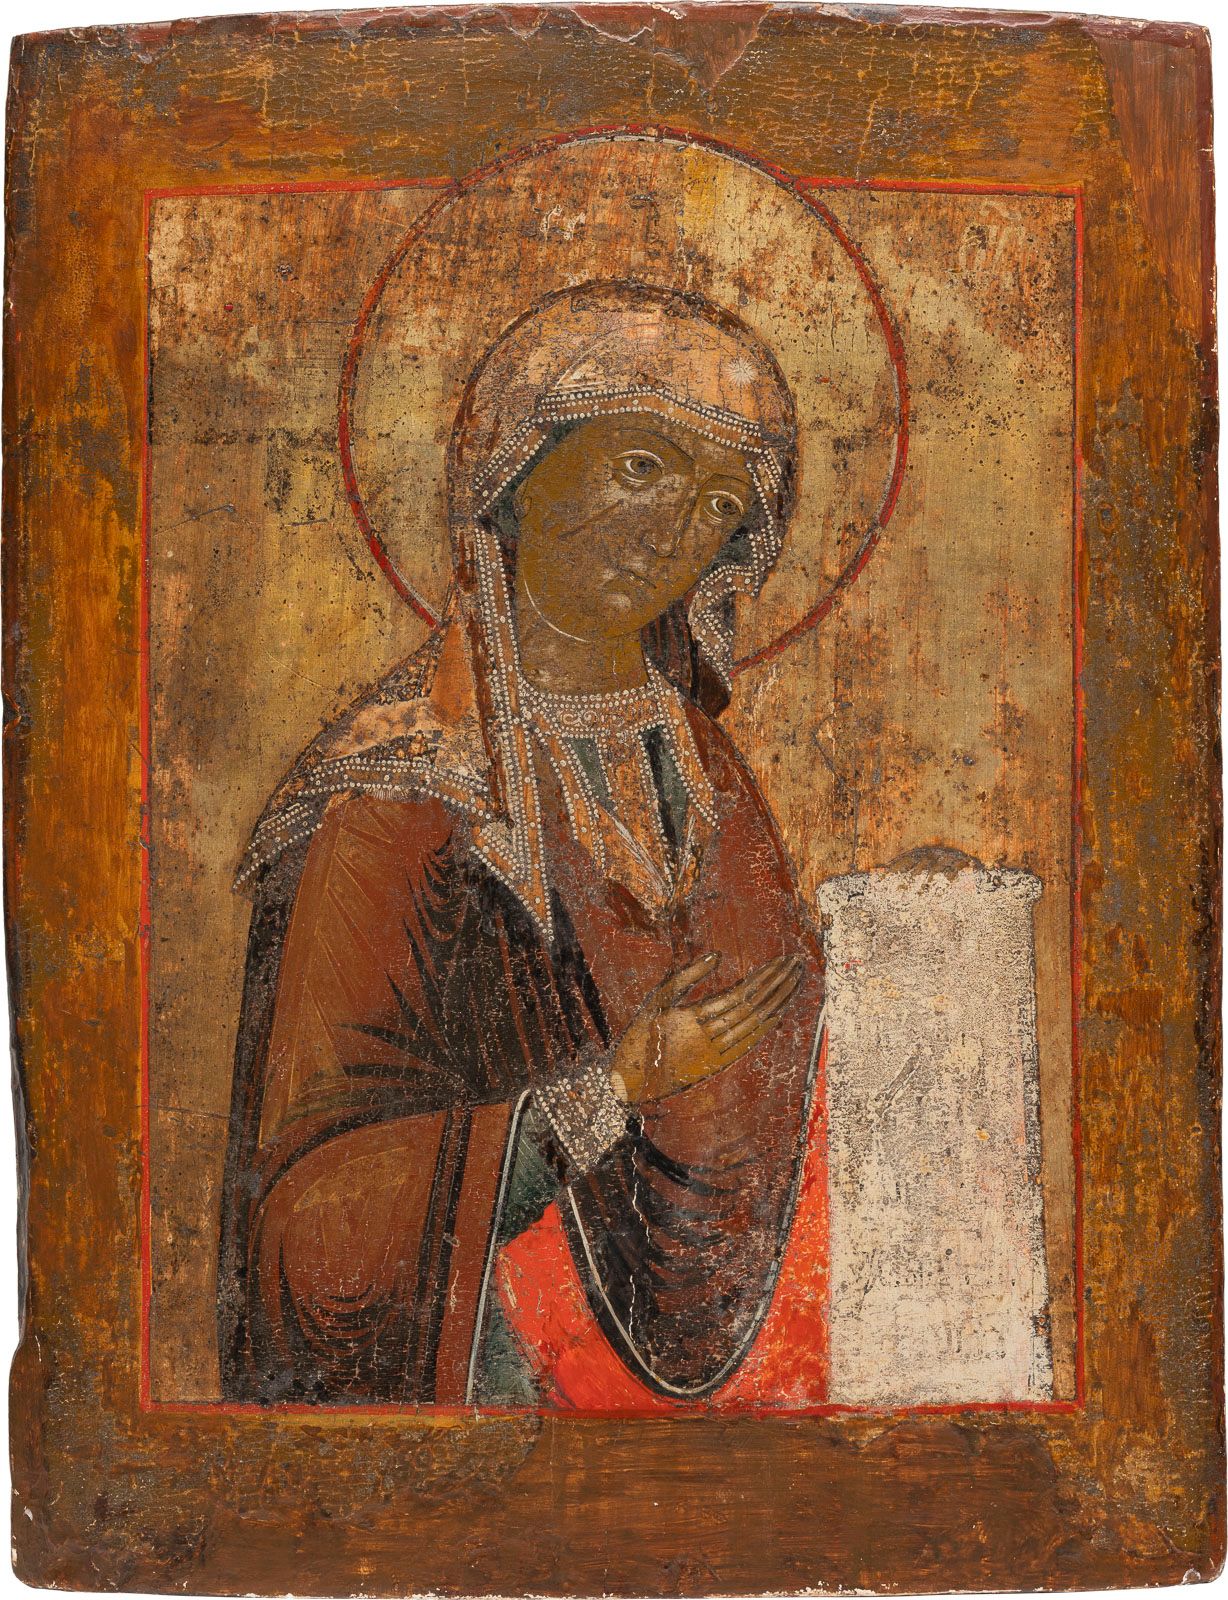 A LARGE ICON SHOWING THE MOTHER OF GOD FROM A DEISIS GRAN ICONO QUE MUESTRA A LA&hellip;